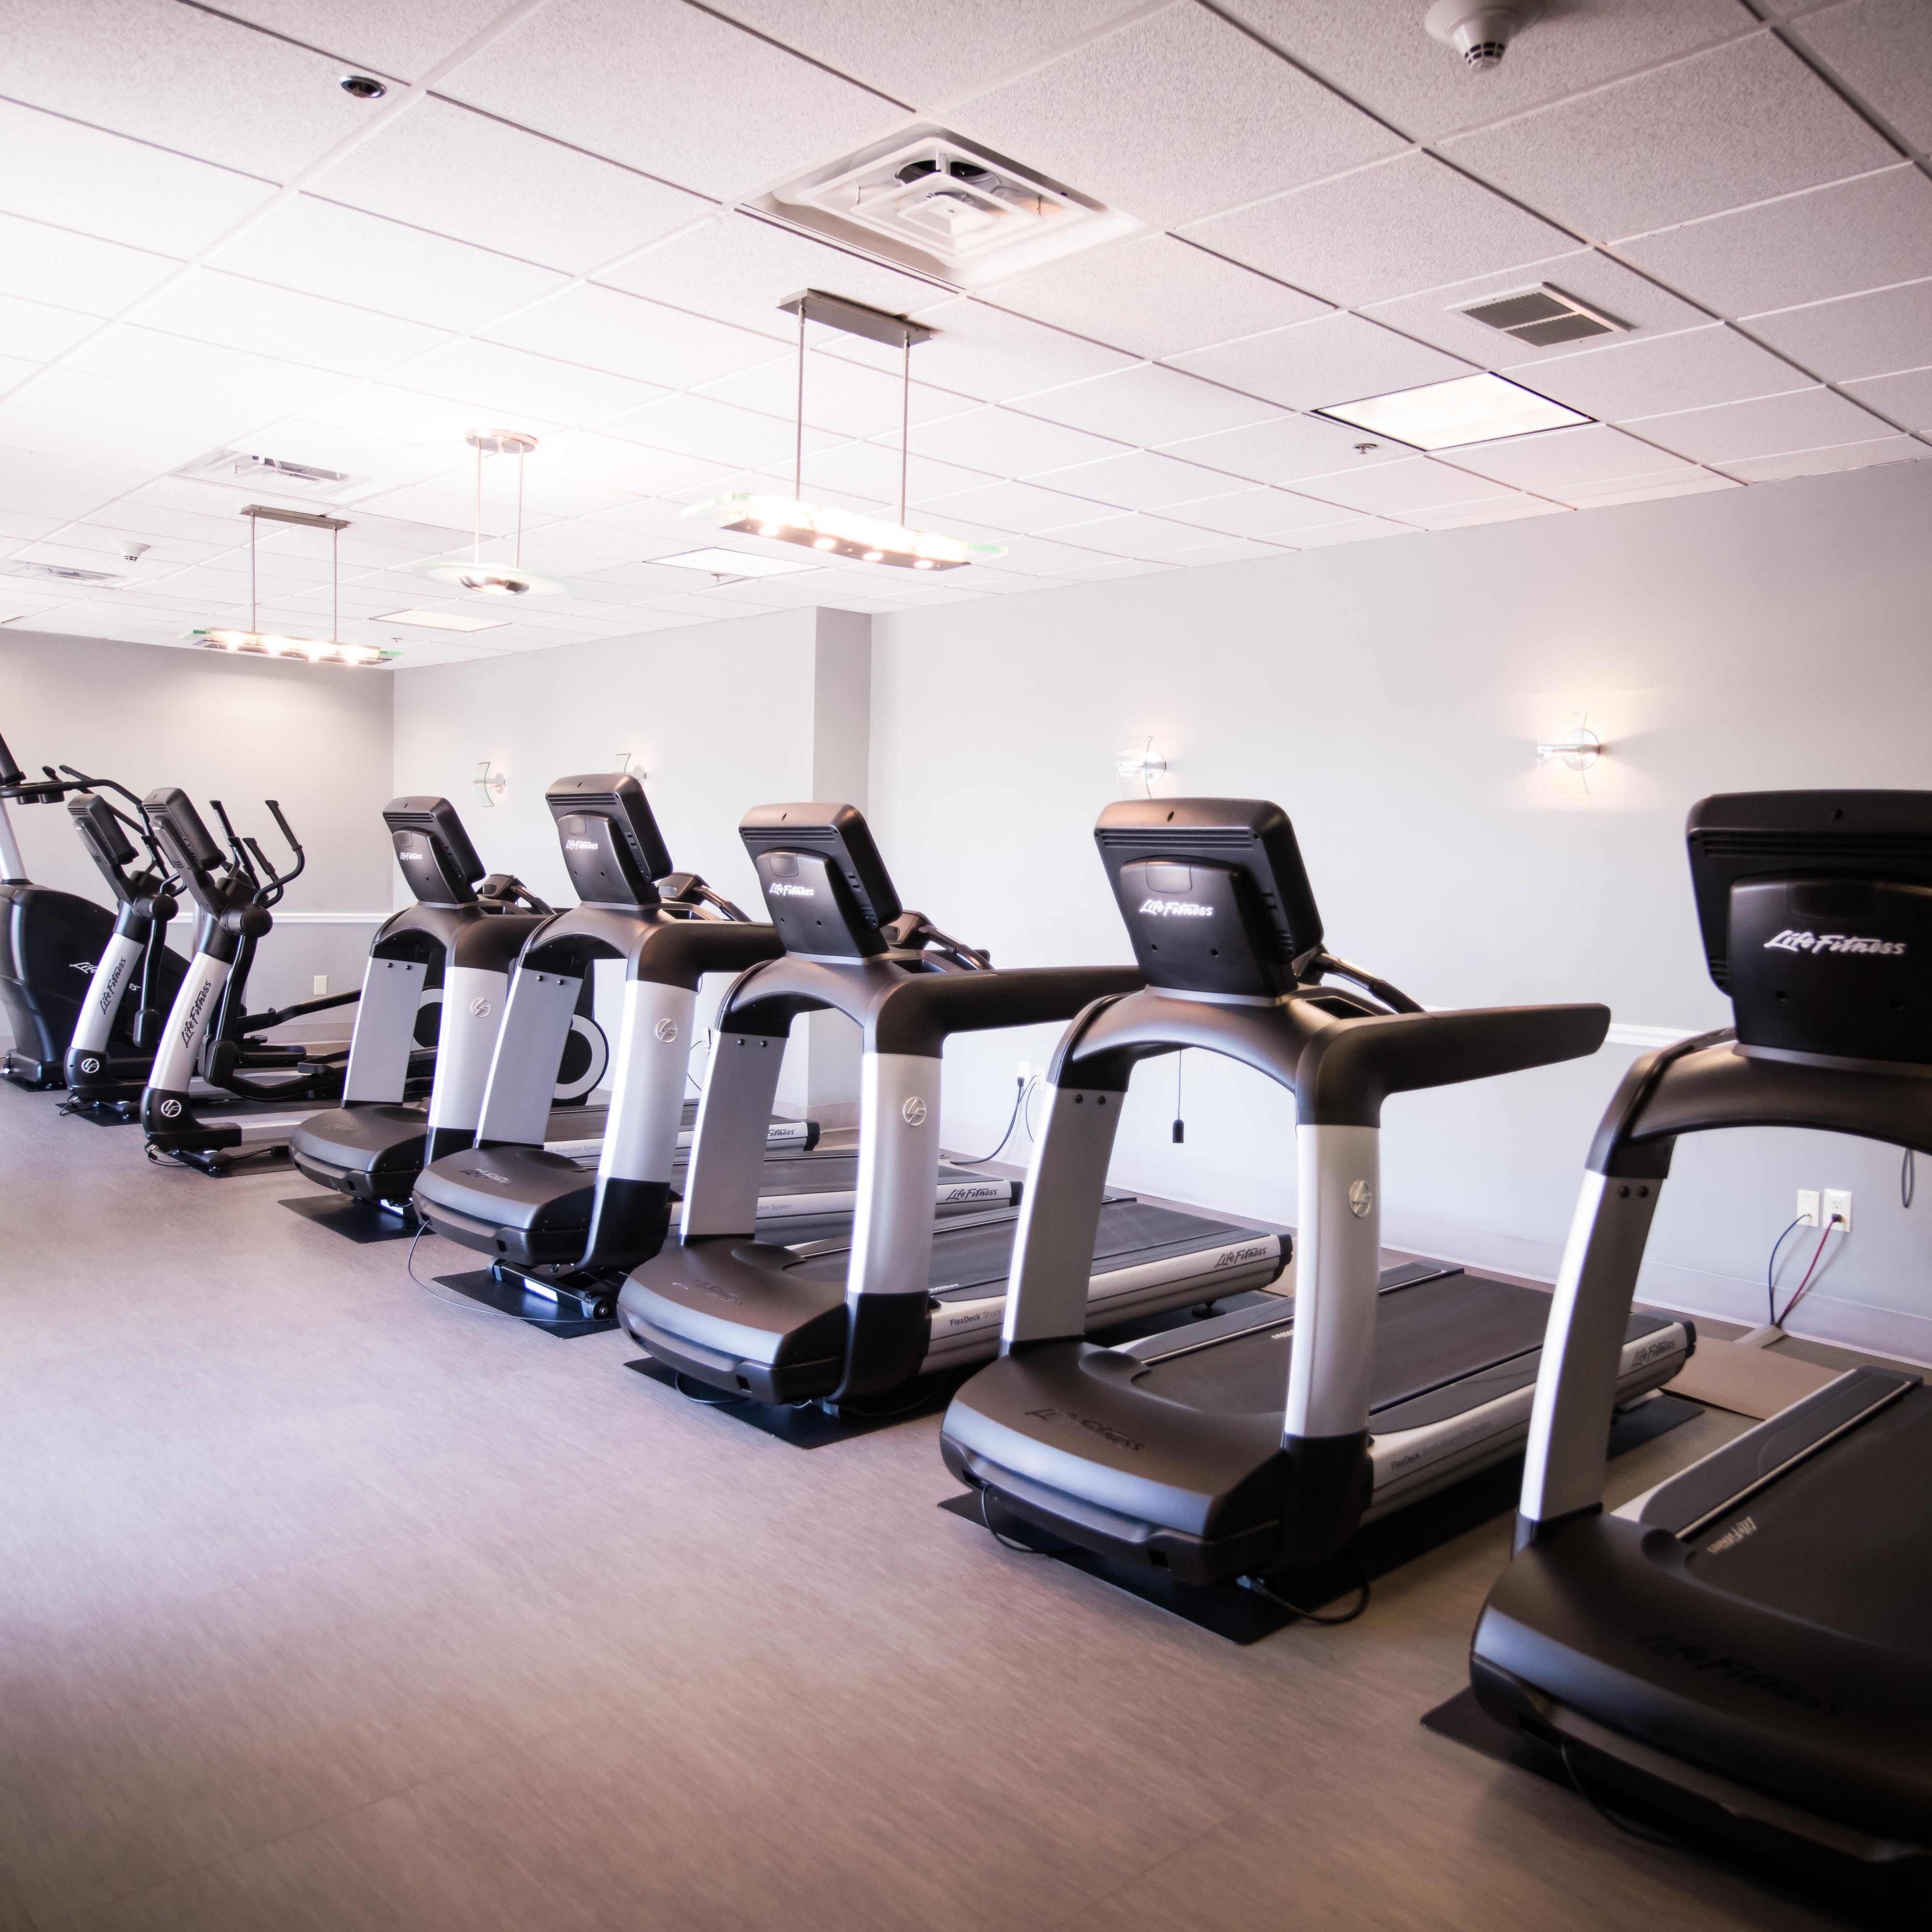 Run, climb, or cycle your way to a better you in our cardio room